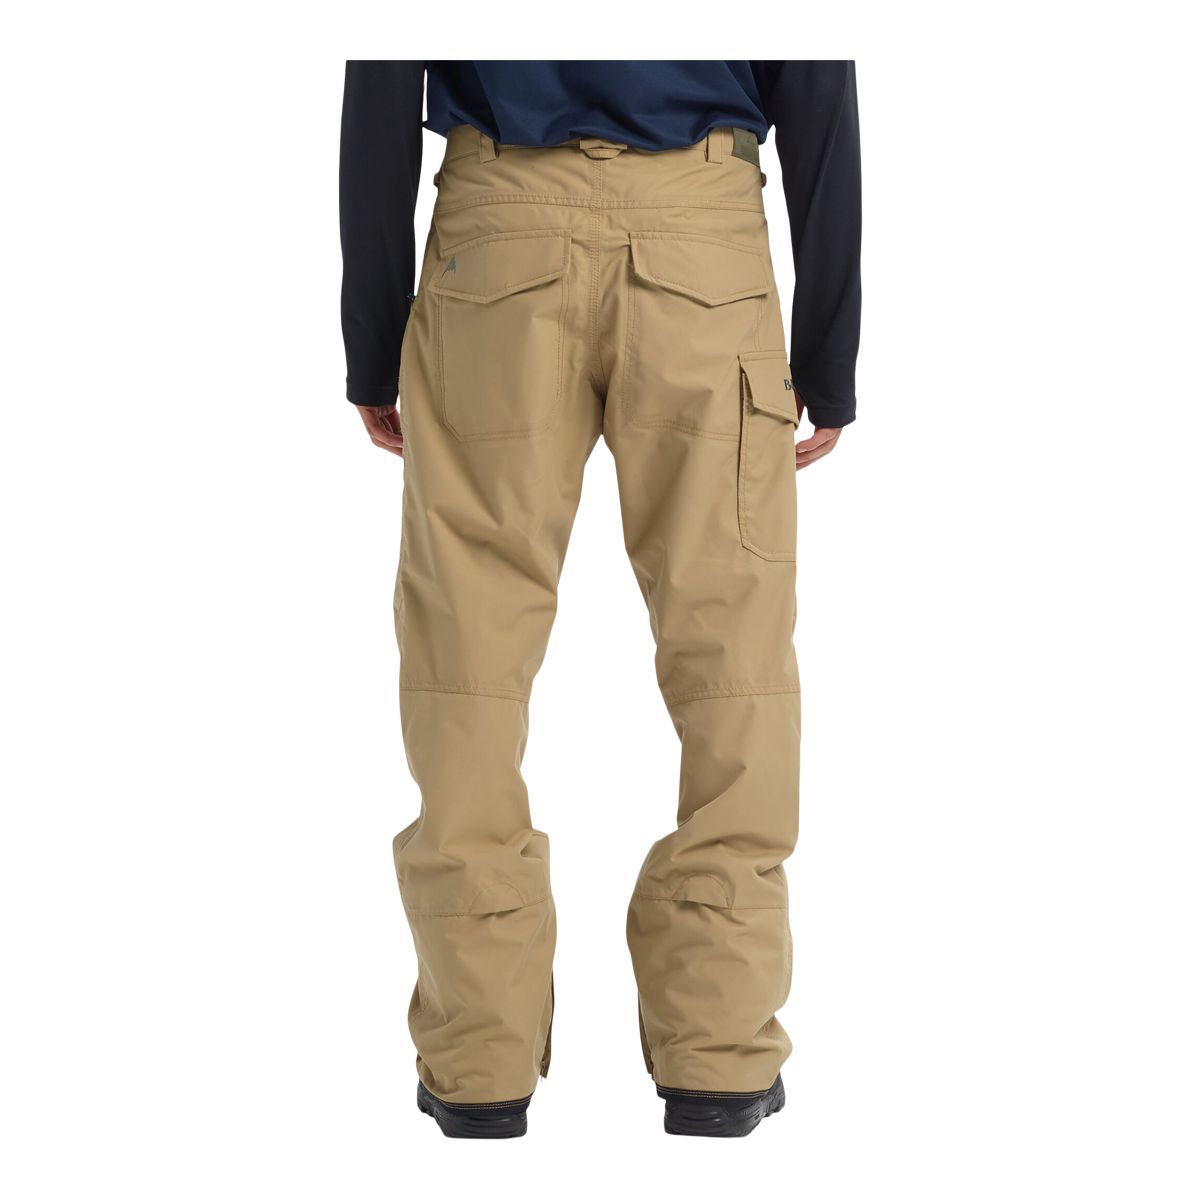 https://media-www.atmosphere.ca/product/div-03-softgoods/dpt-76-outerwear/sdpt-01-mens/332914282/burton-mens-covert-ins-pant-f-kelp-250-s--38623e0f-c615-49f7-9986-d18b990f3018-jpgrendition.jpg?imdensity=1&imwidth=1244&impolicy=mZoom